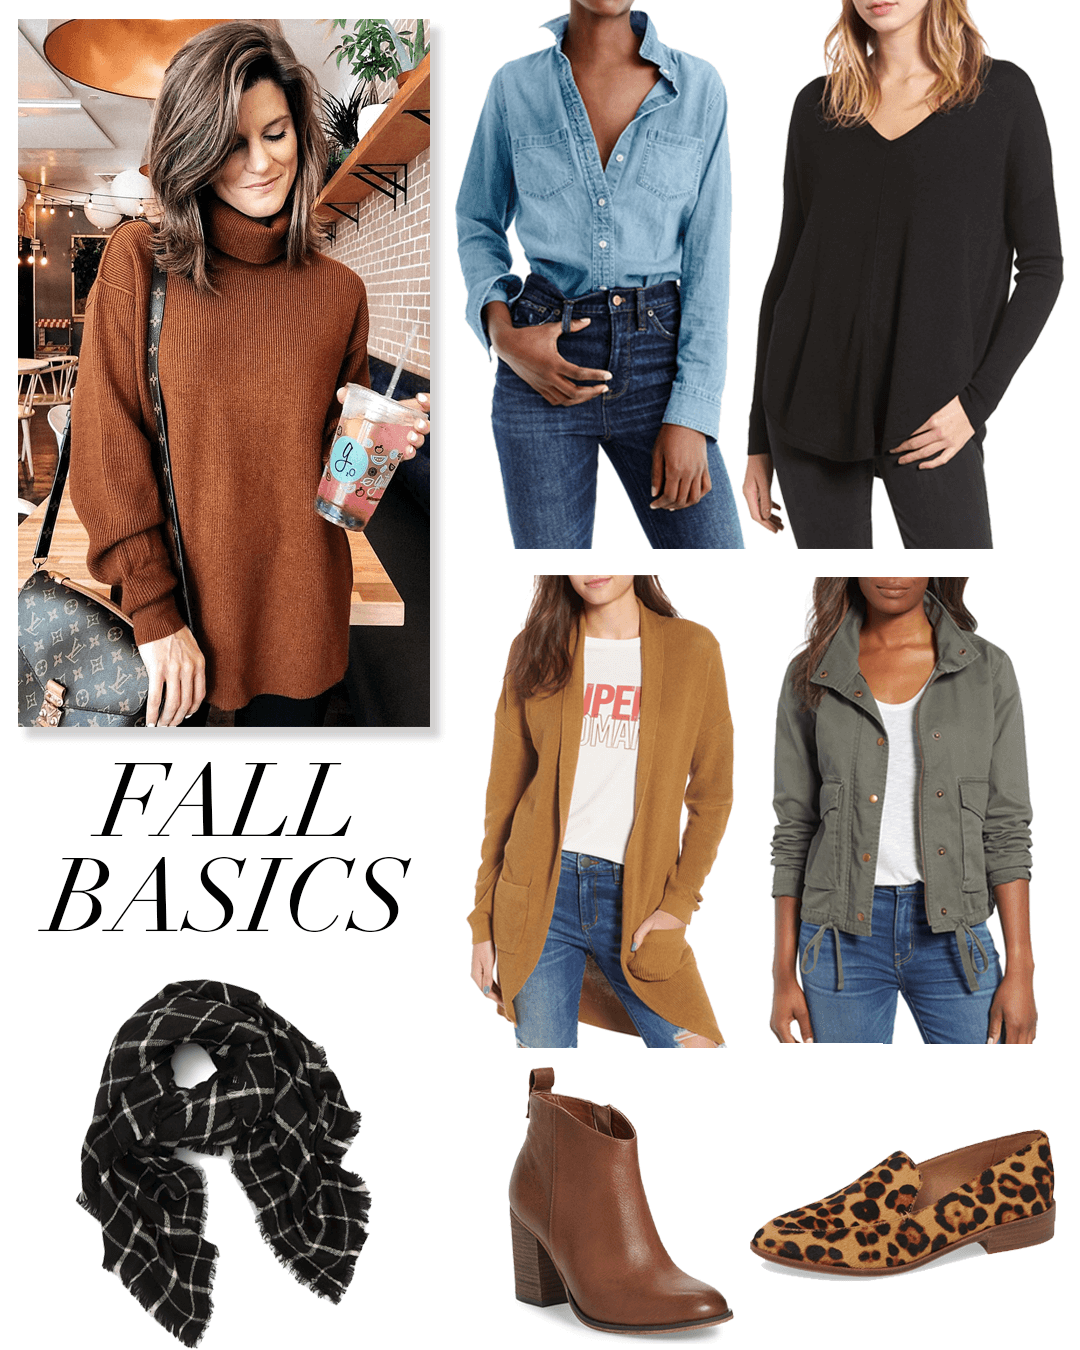 Basics for fall✨ Links are in my bio: on my  storefront under “fall  outfits + basics” list idea & sizing details are on the �